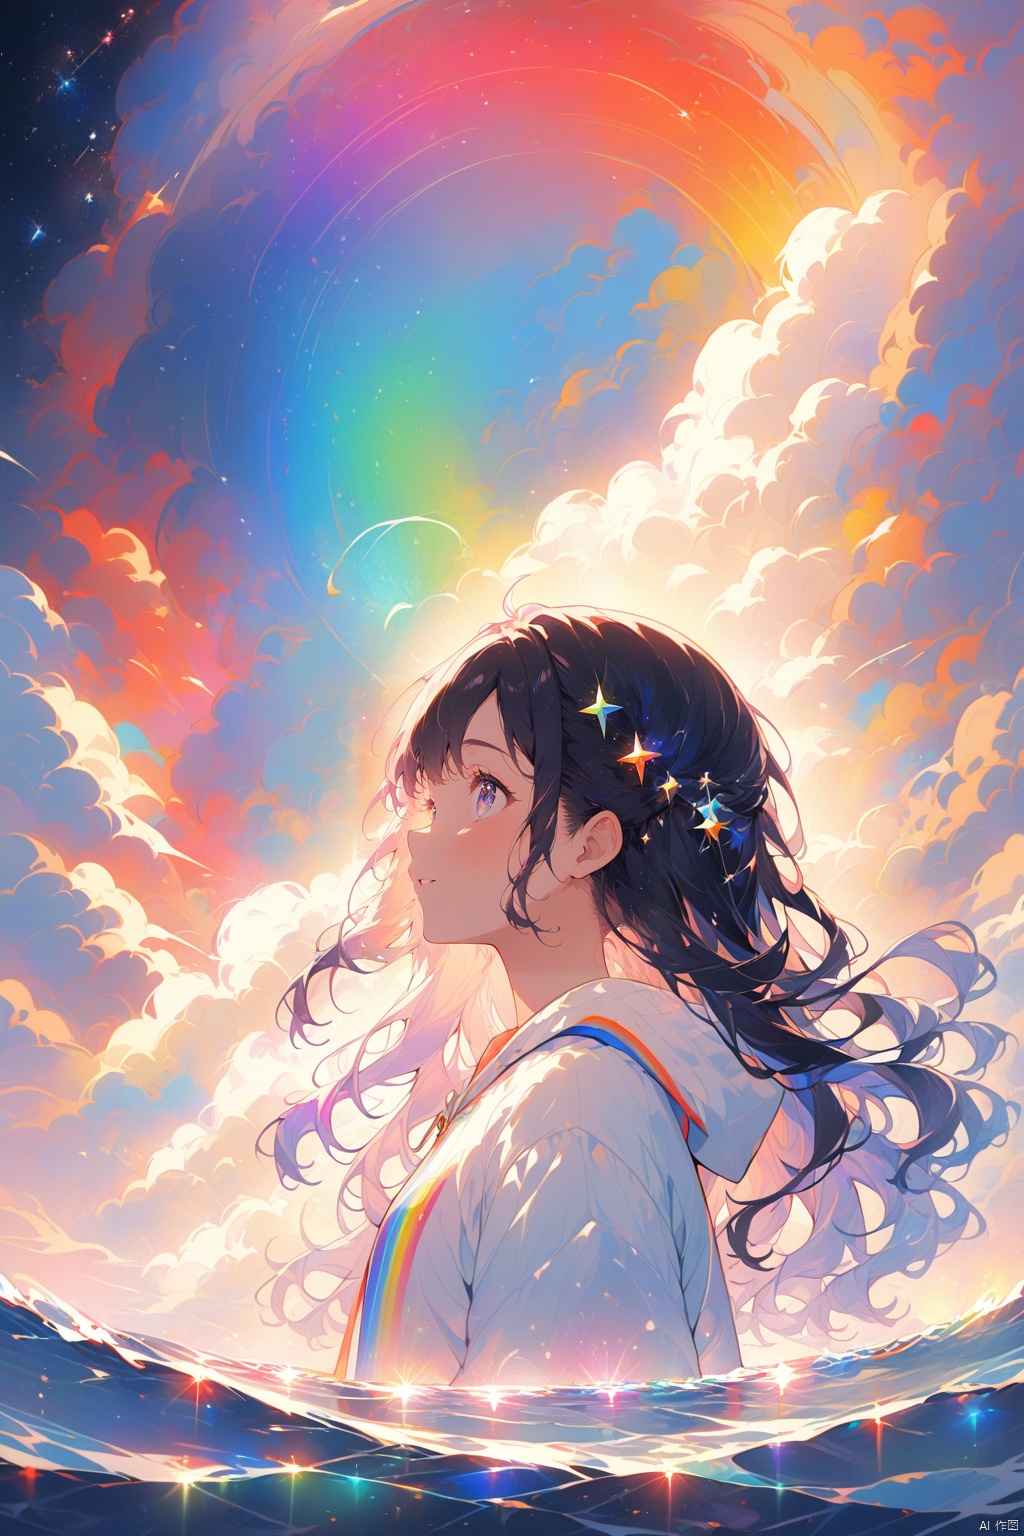  1 girl, lovely, long hair, closeup, portrait, upper body, face from left side, on the sea, under the starry sky, the sea reflects the starry sky, rainbow color light reflected on the girl's face, sparkling lights, magical atmosphere, pointillism, Silhouette view, Cosmic wonders, Mysterious and colorful, nebula light, cosmic light, galactic light, Astronomical view, Macroscopic perspective, perspective view, masterpiece,